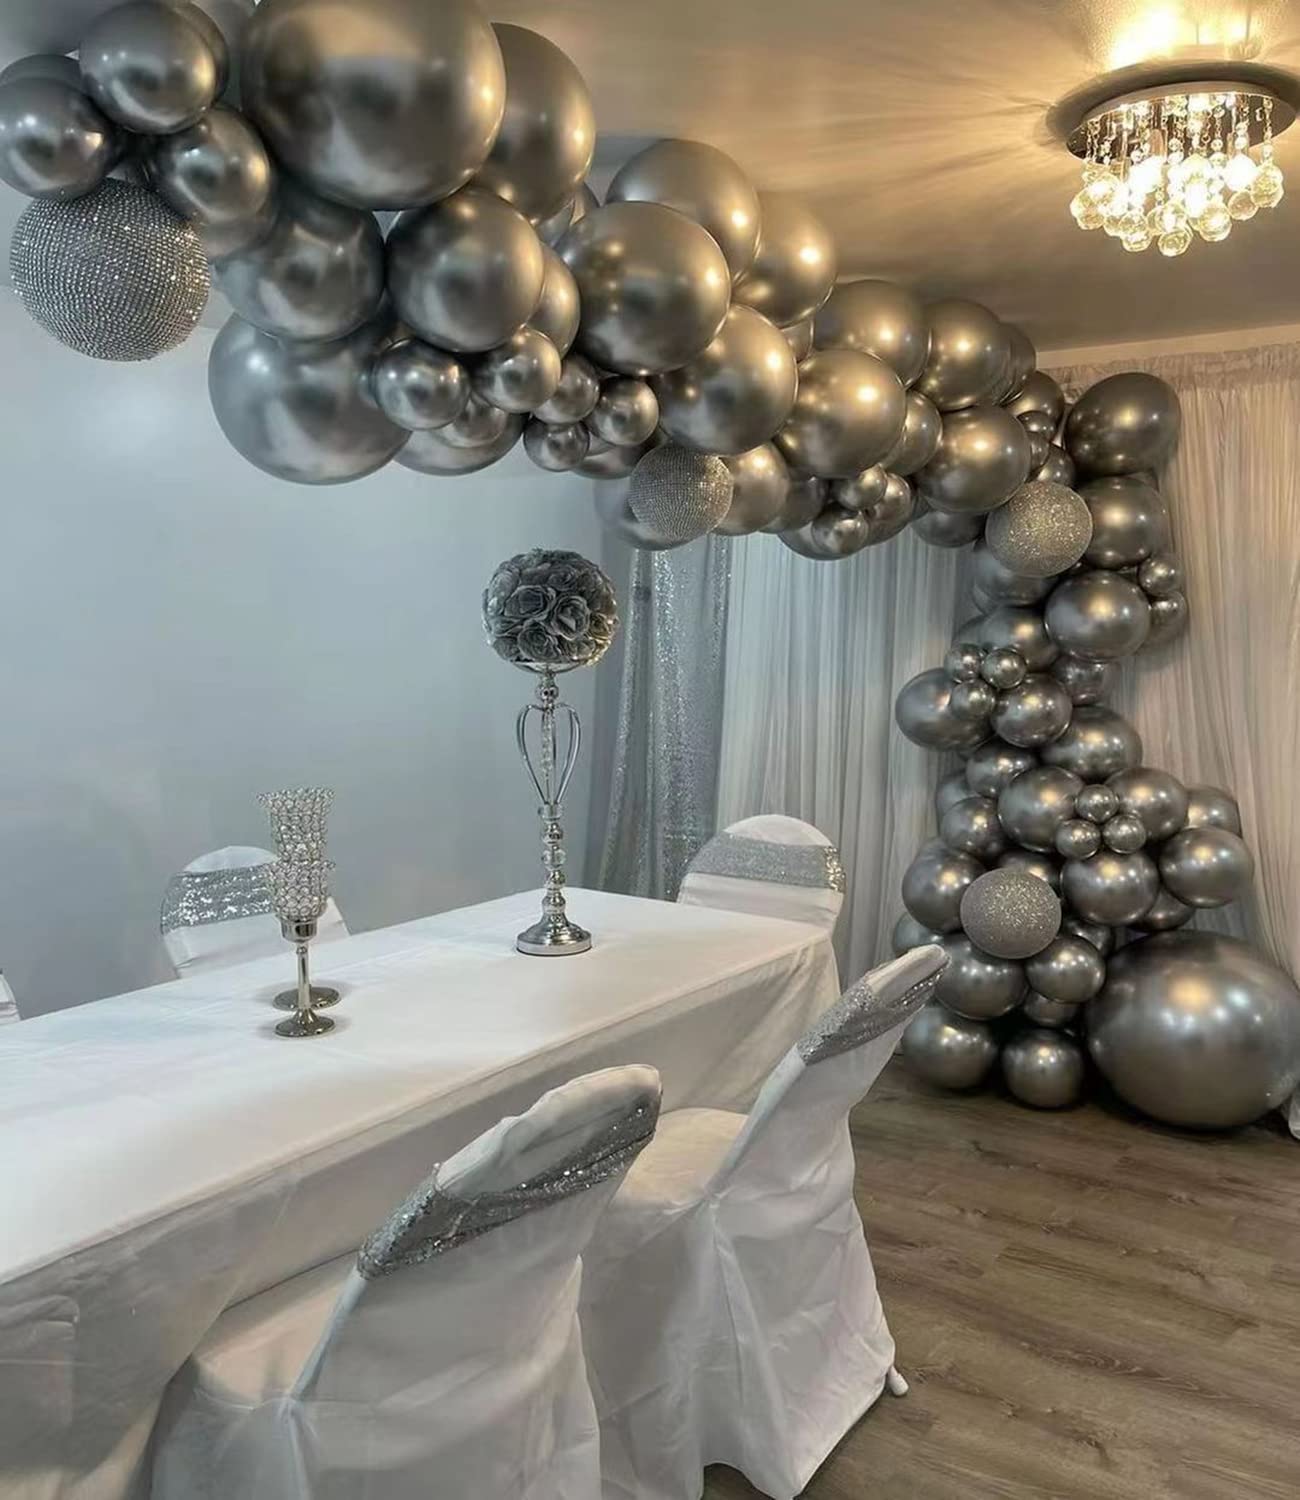 HUICYHFR Silver Metallic Chrome Latex Balloon Arch Kit, 102PCS 18In 12In 10In 5In Arch Garland For Engagement, Wedding, Birthday Party, Anniversary Celebration Decoration With 33FT Ribbon